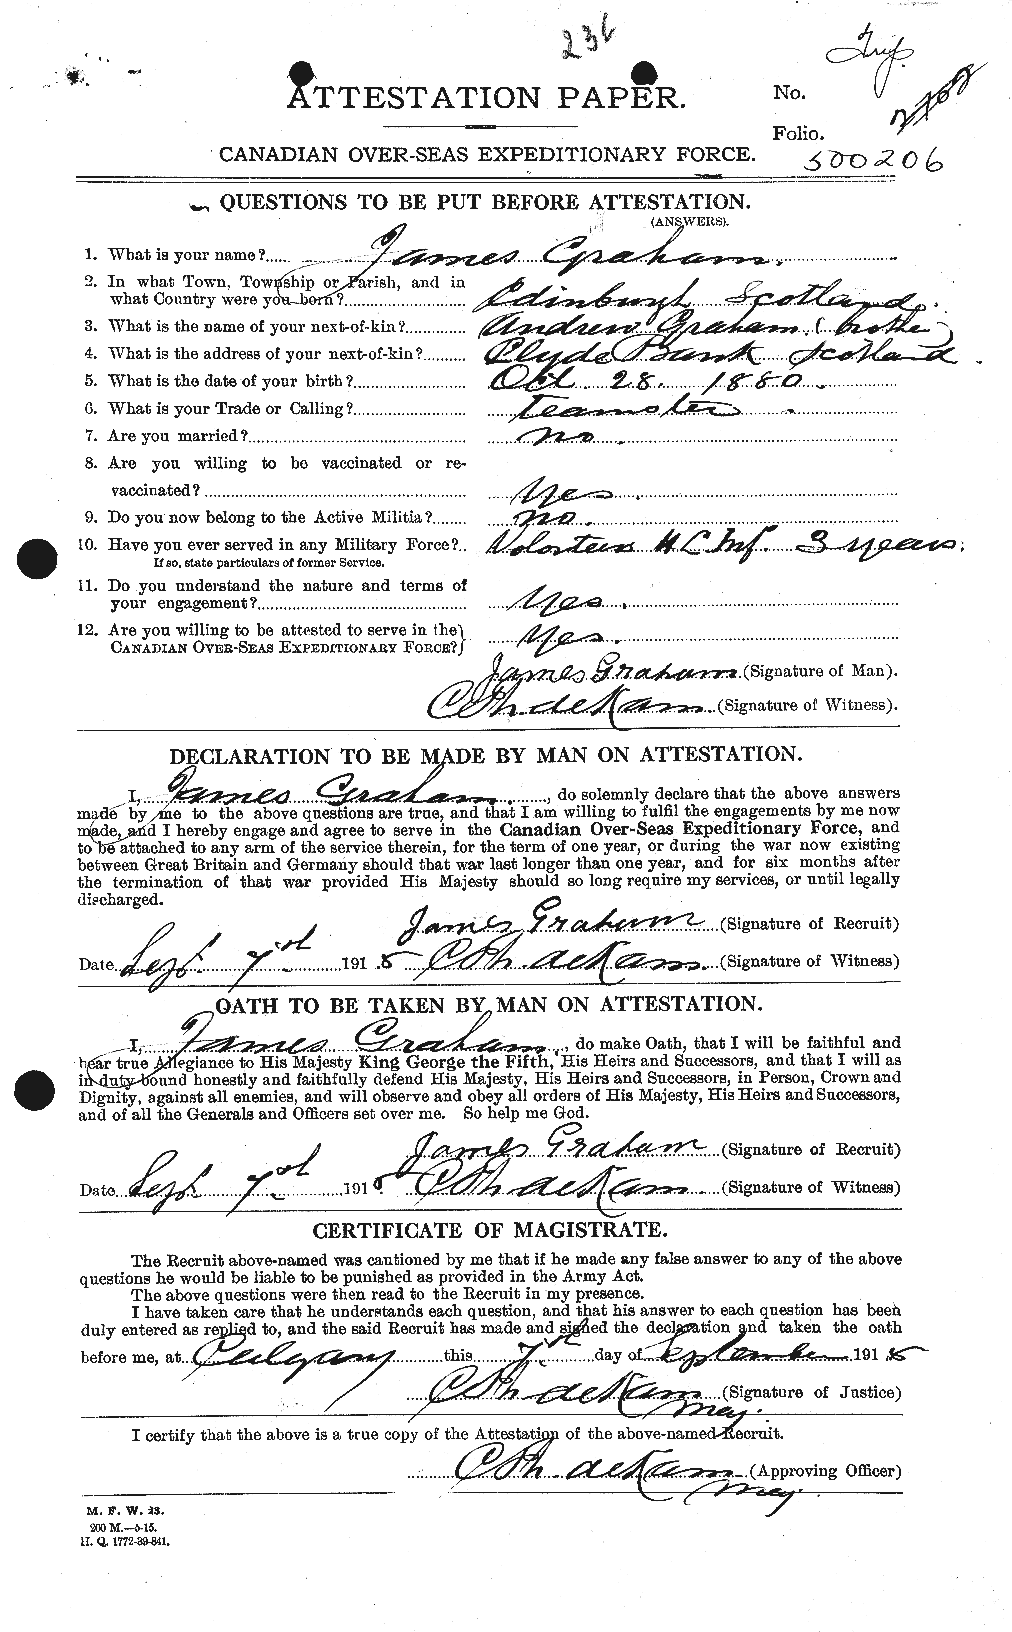 Personnel Records of the First World War - CEF 357781a